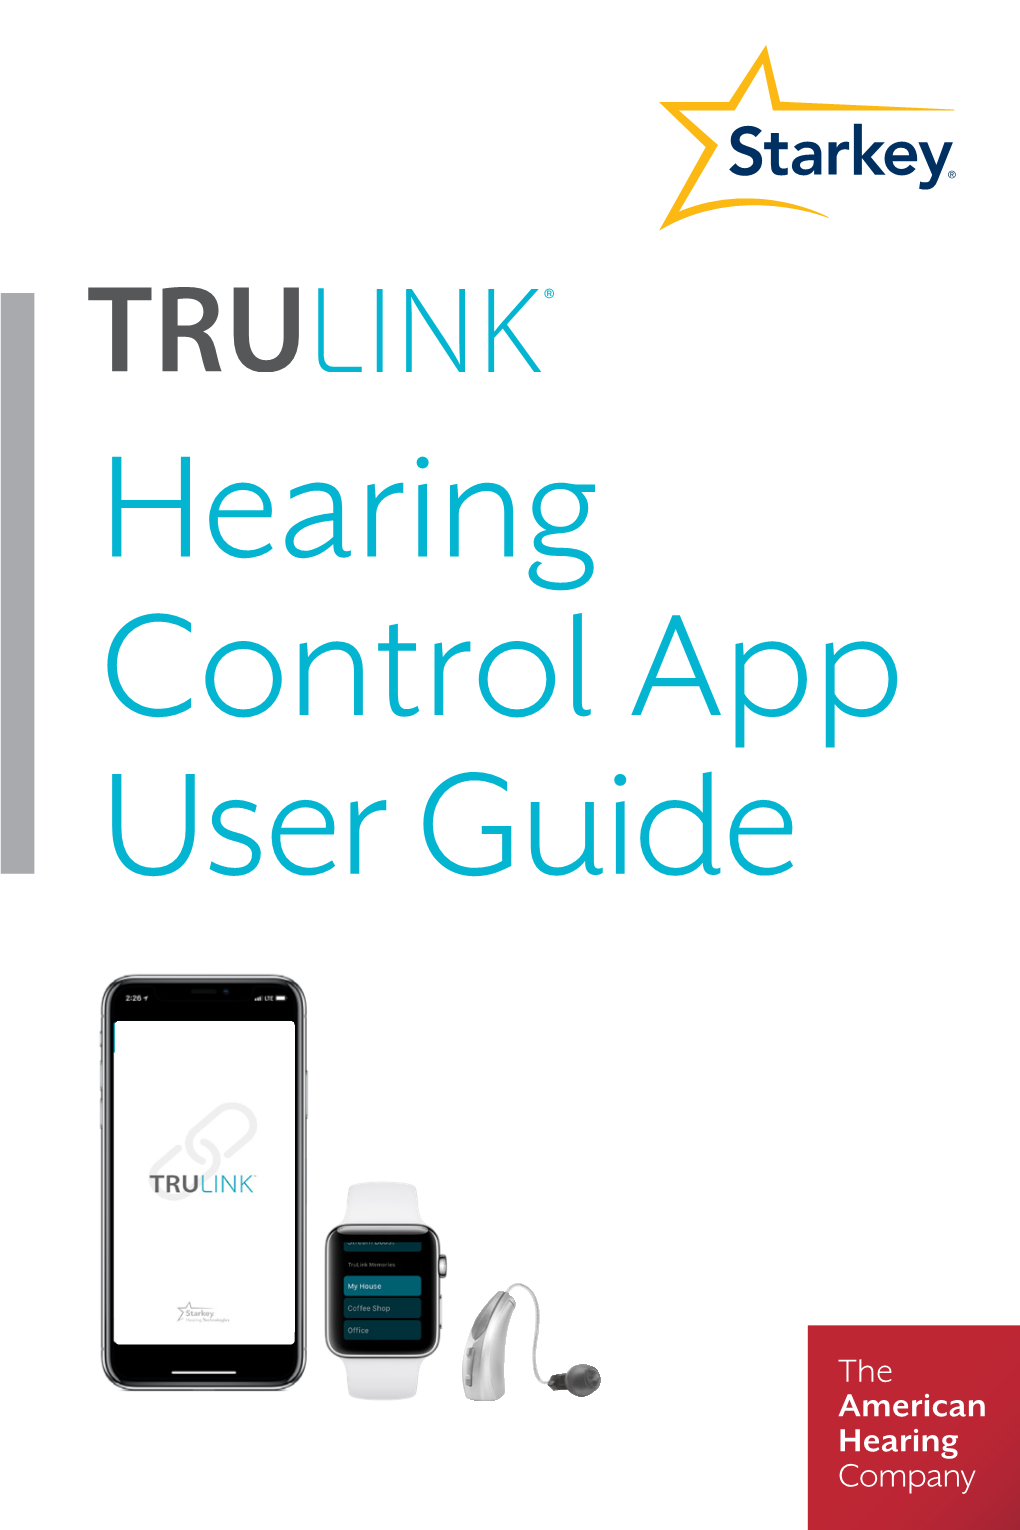 Trulink Hearing Control App User Guide